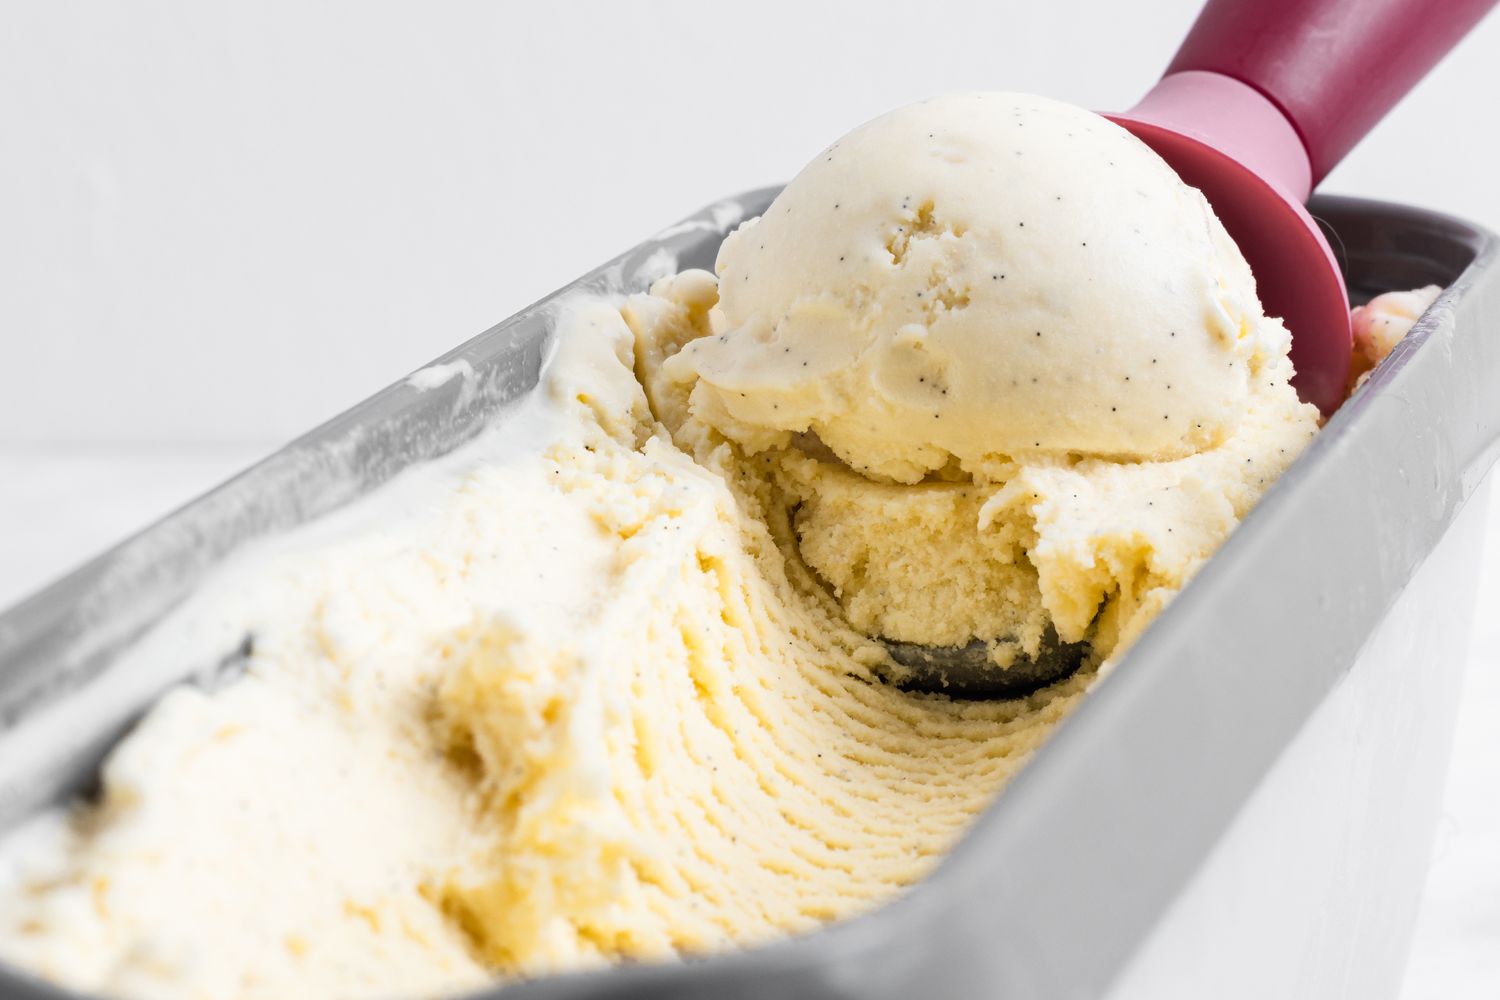 How To Make French Vanilla Ice Cream With An Ice Cream Maker